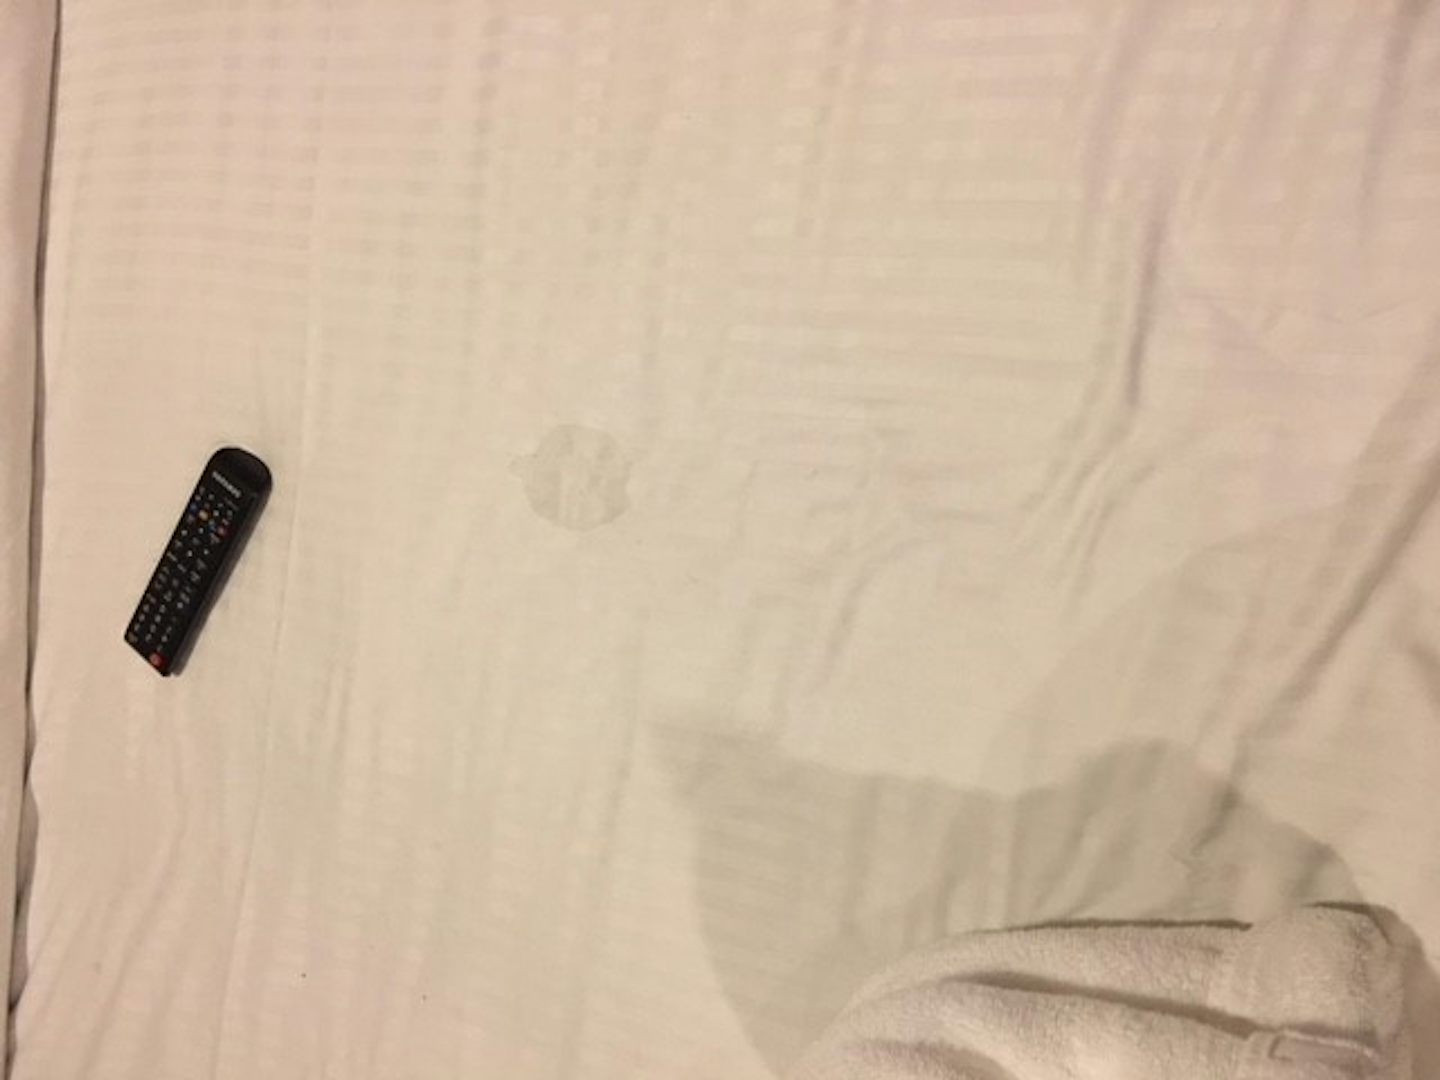 The spot on our bedsheet - not from us.